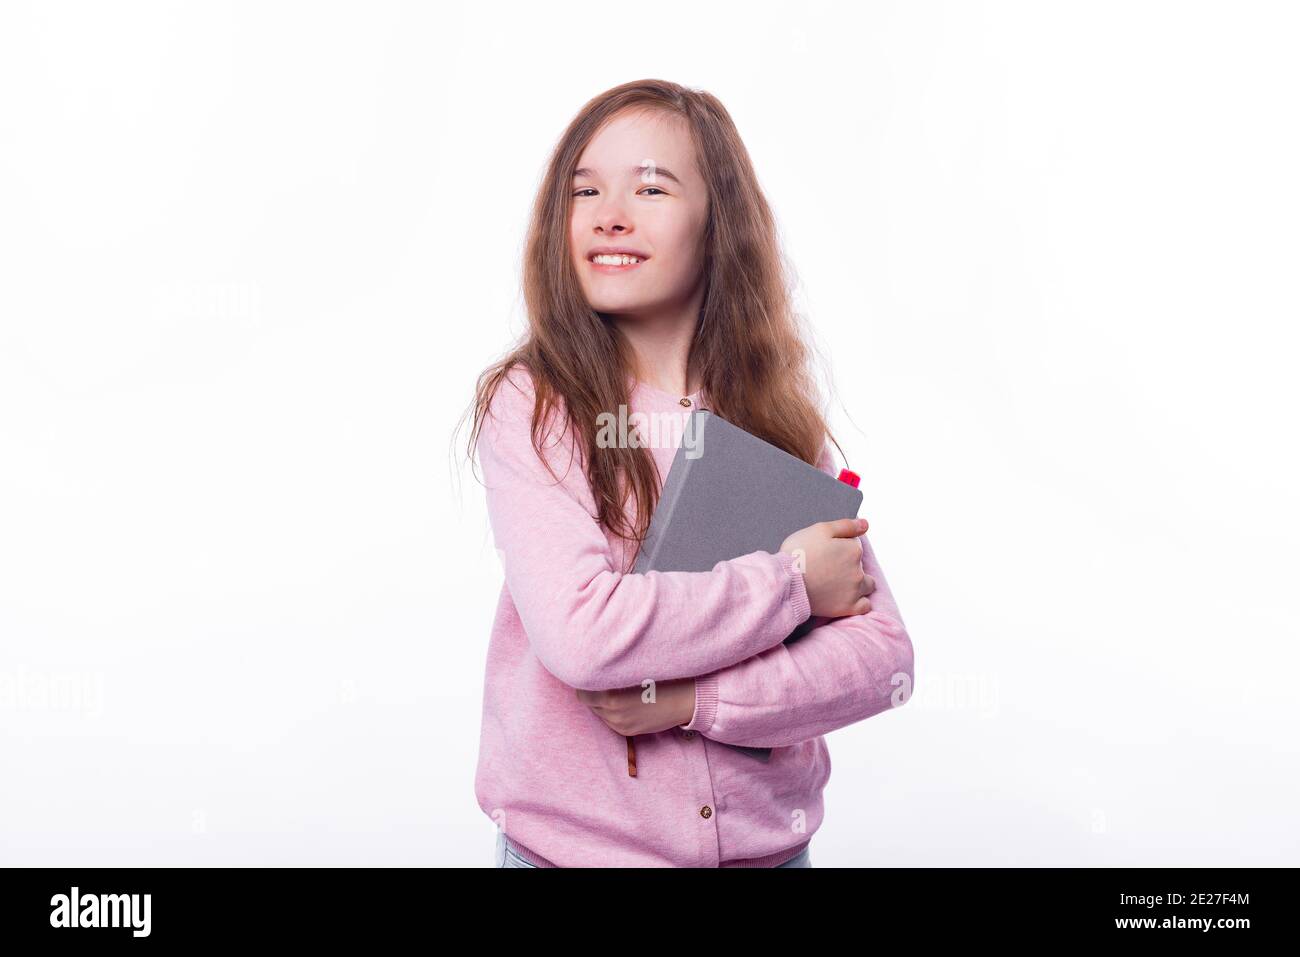 Portrait of joyful young girl holding planner over white background. Stock Photo